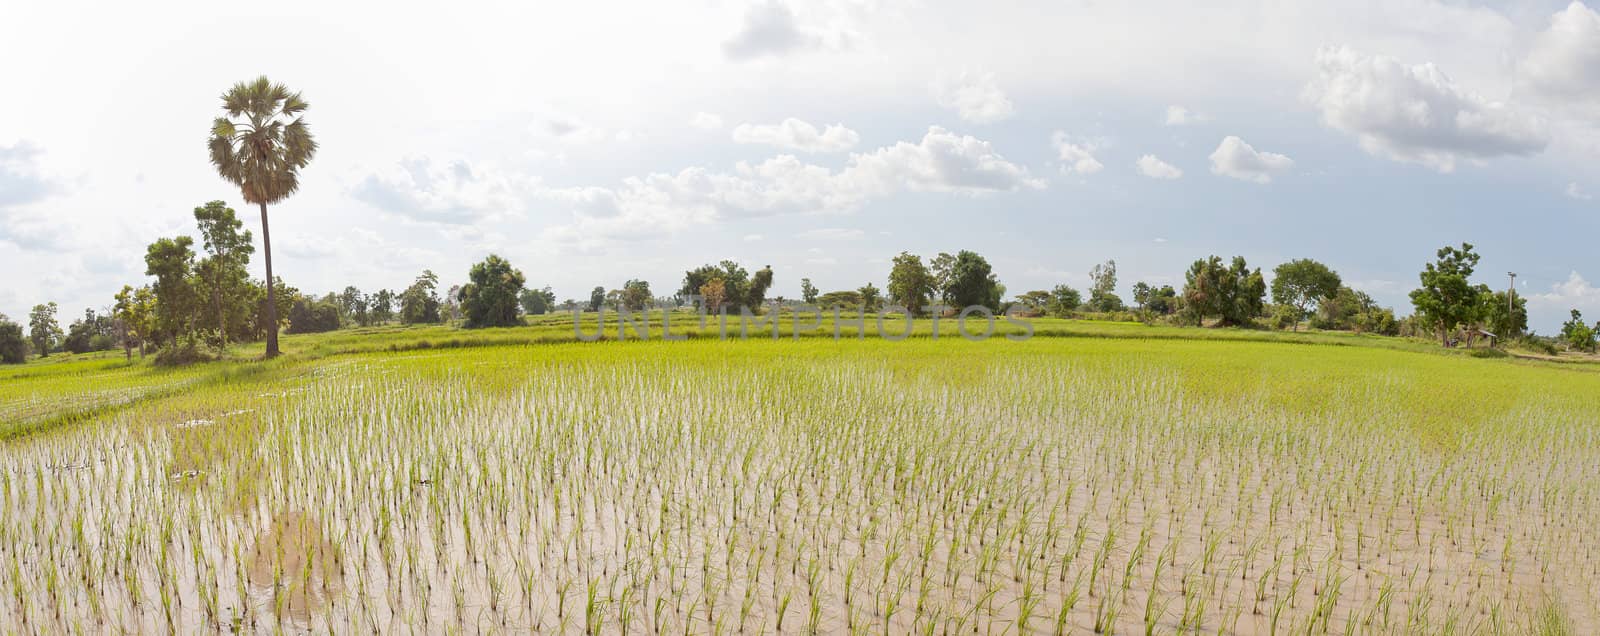 Rice field Panorma, Thailand by FrameAngel